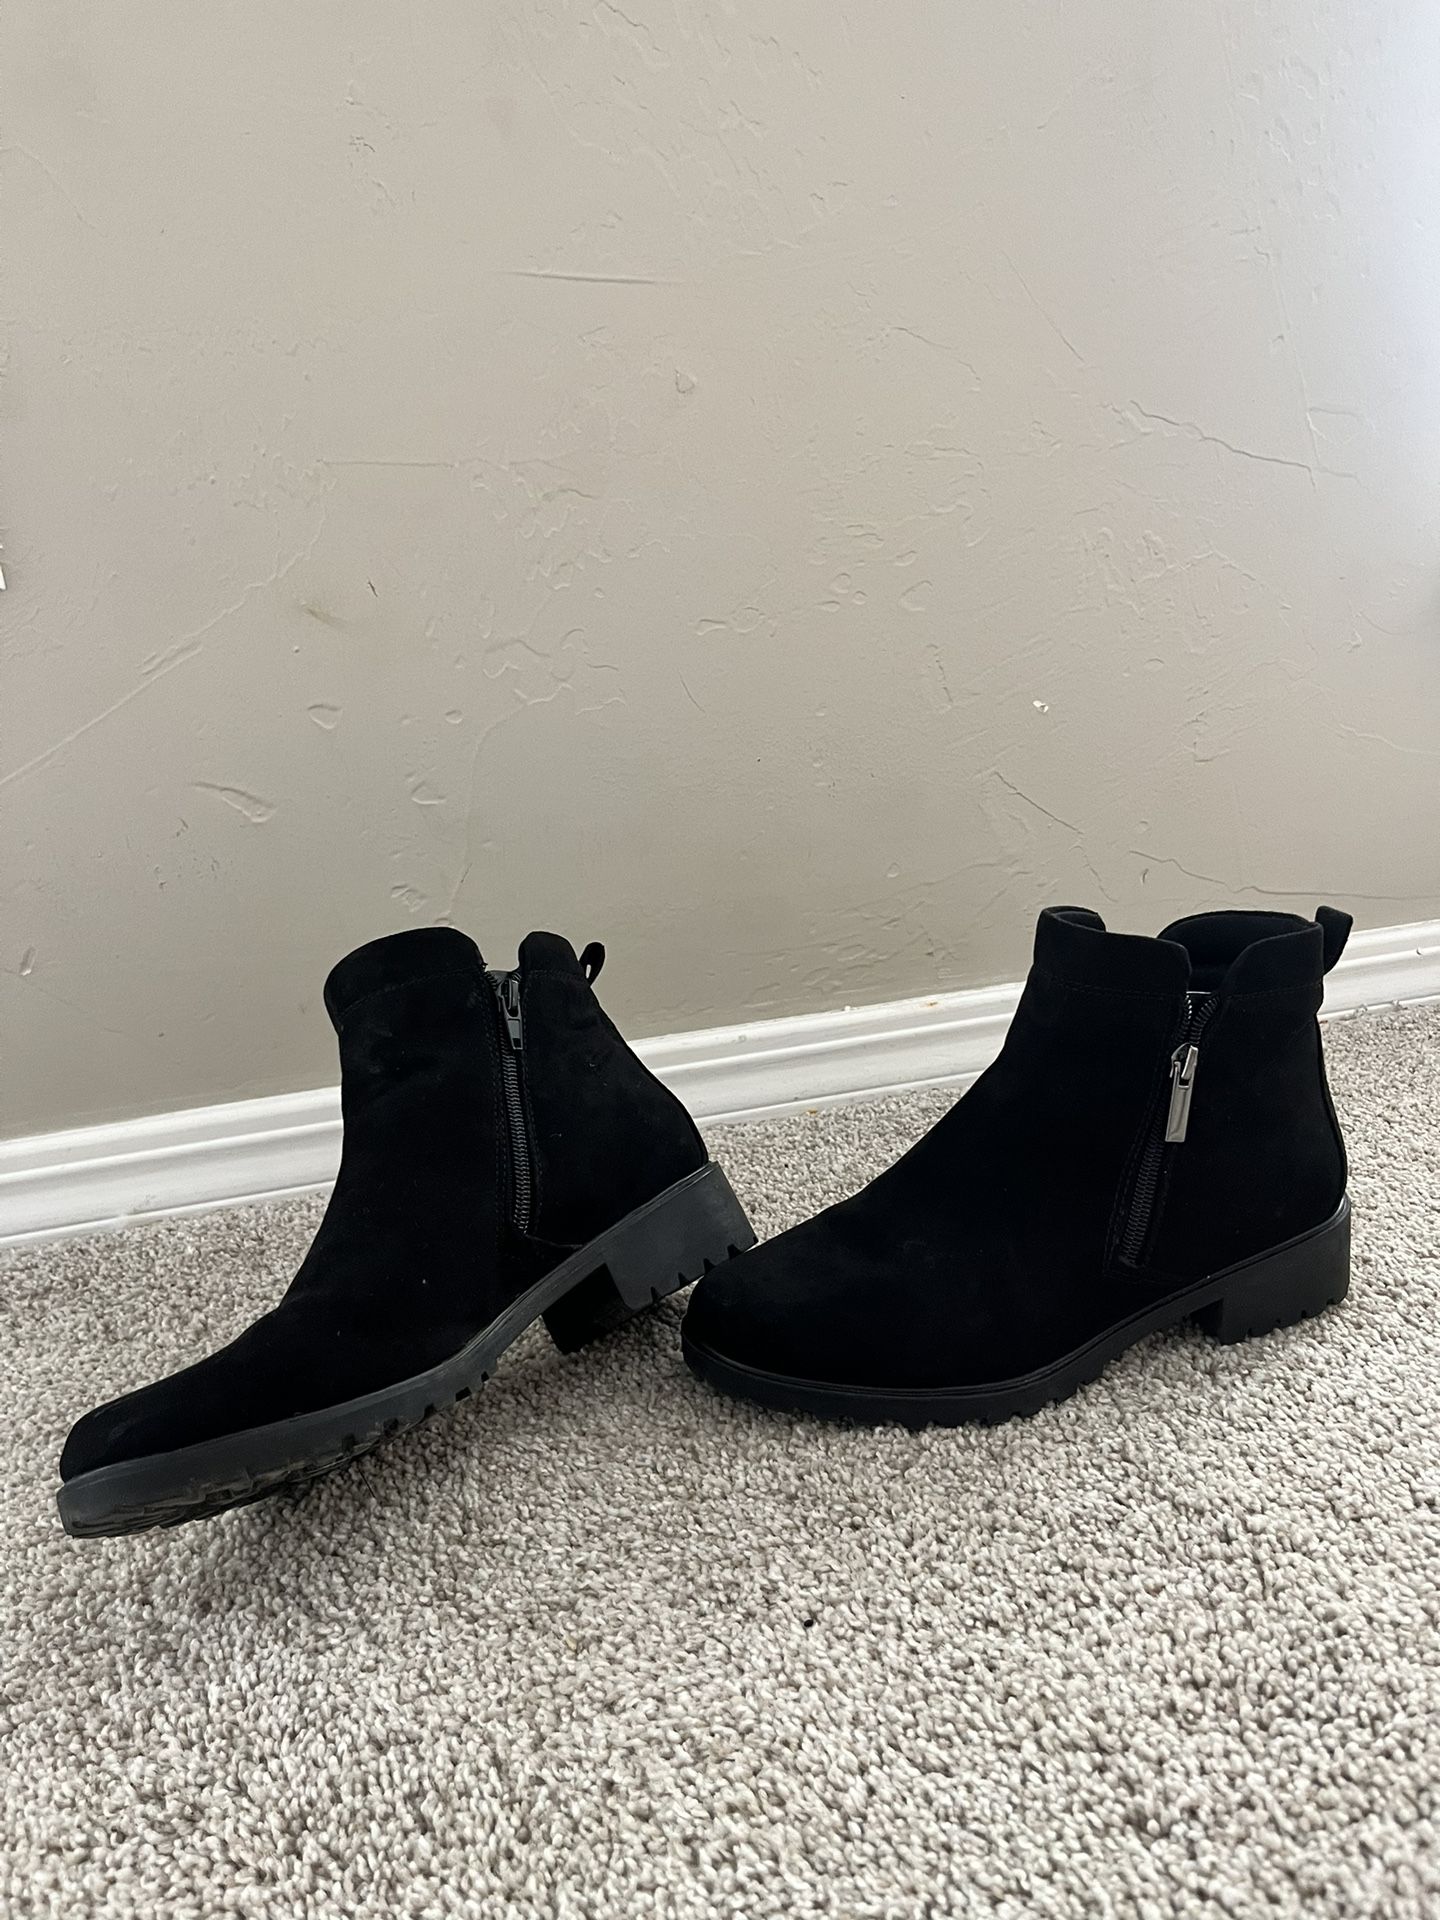 Simple Black Boots